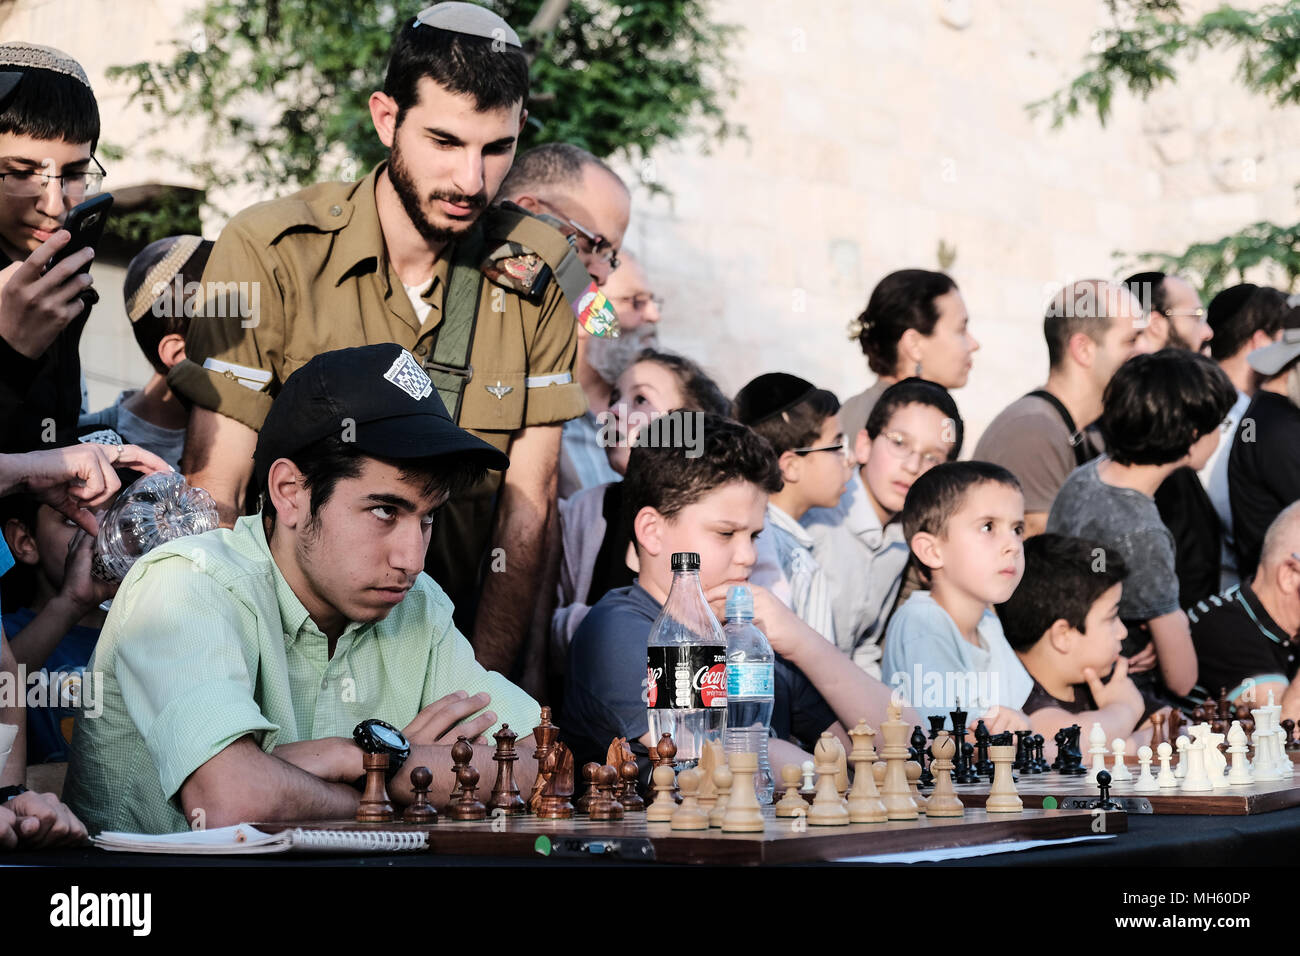 Jerusalem, Israel. 30th April, 2018. Anatoly Yevgenyevich Karpov, 66, Russian chess grandmaster and Viswanathan 'Vishy' Anand, 49, Indian chess grandmaster, play chess against dozens of Israeli youth champions simultaneously at the Jaffa Gate in the framework of Israel's 70th Independence Day celebrations. Credit: Nir Alon/Alamy Live News Stock Photo